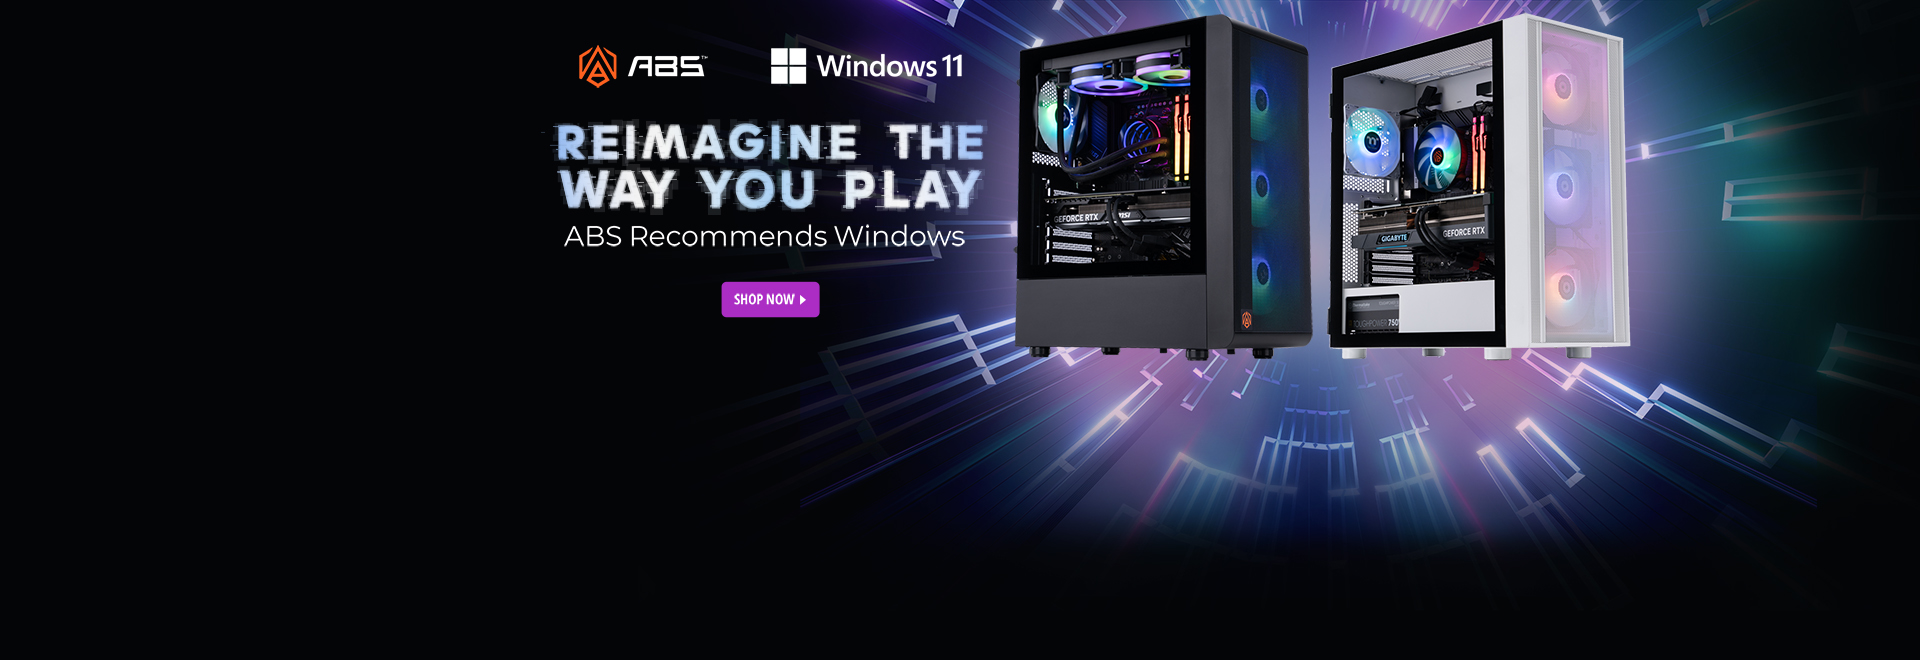 newegg.com - ABS gaming pcs and accessories